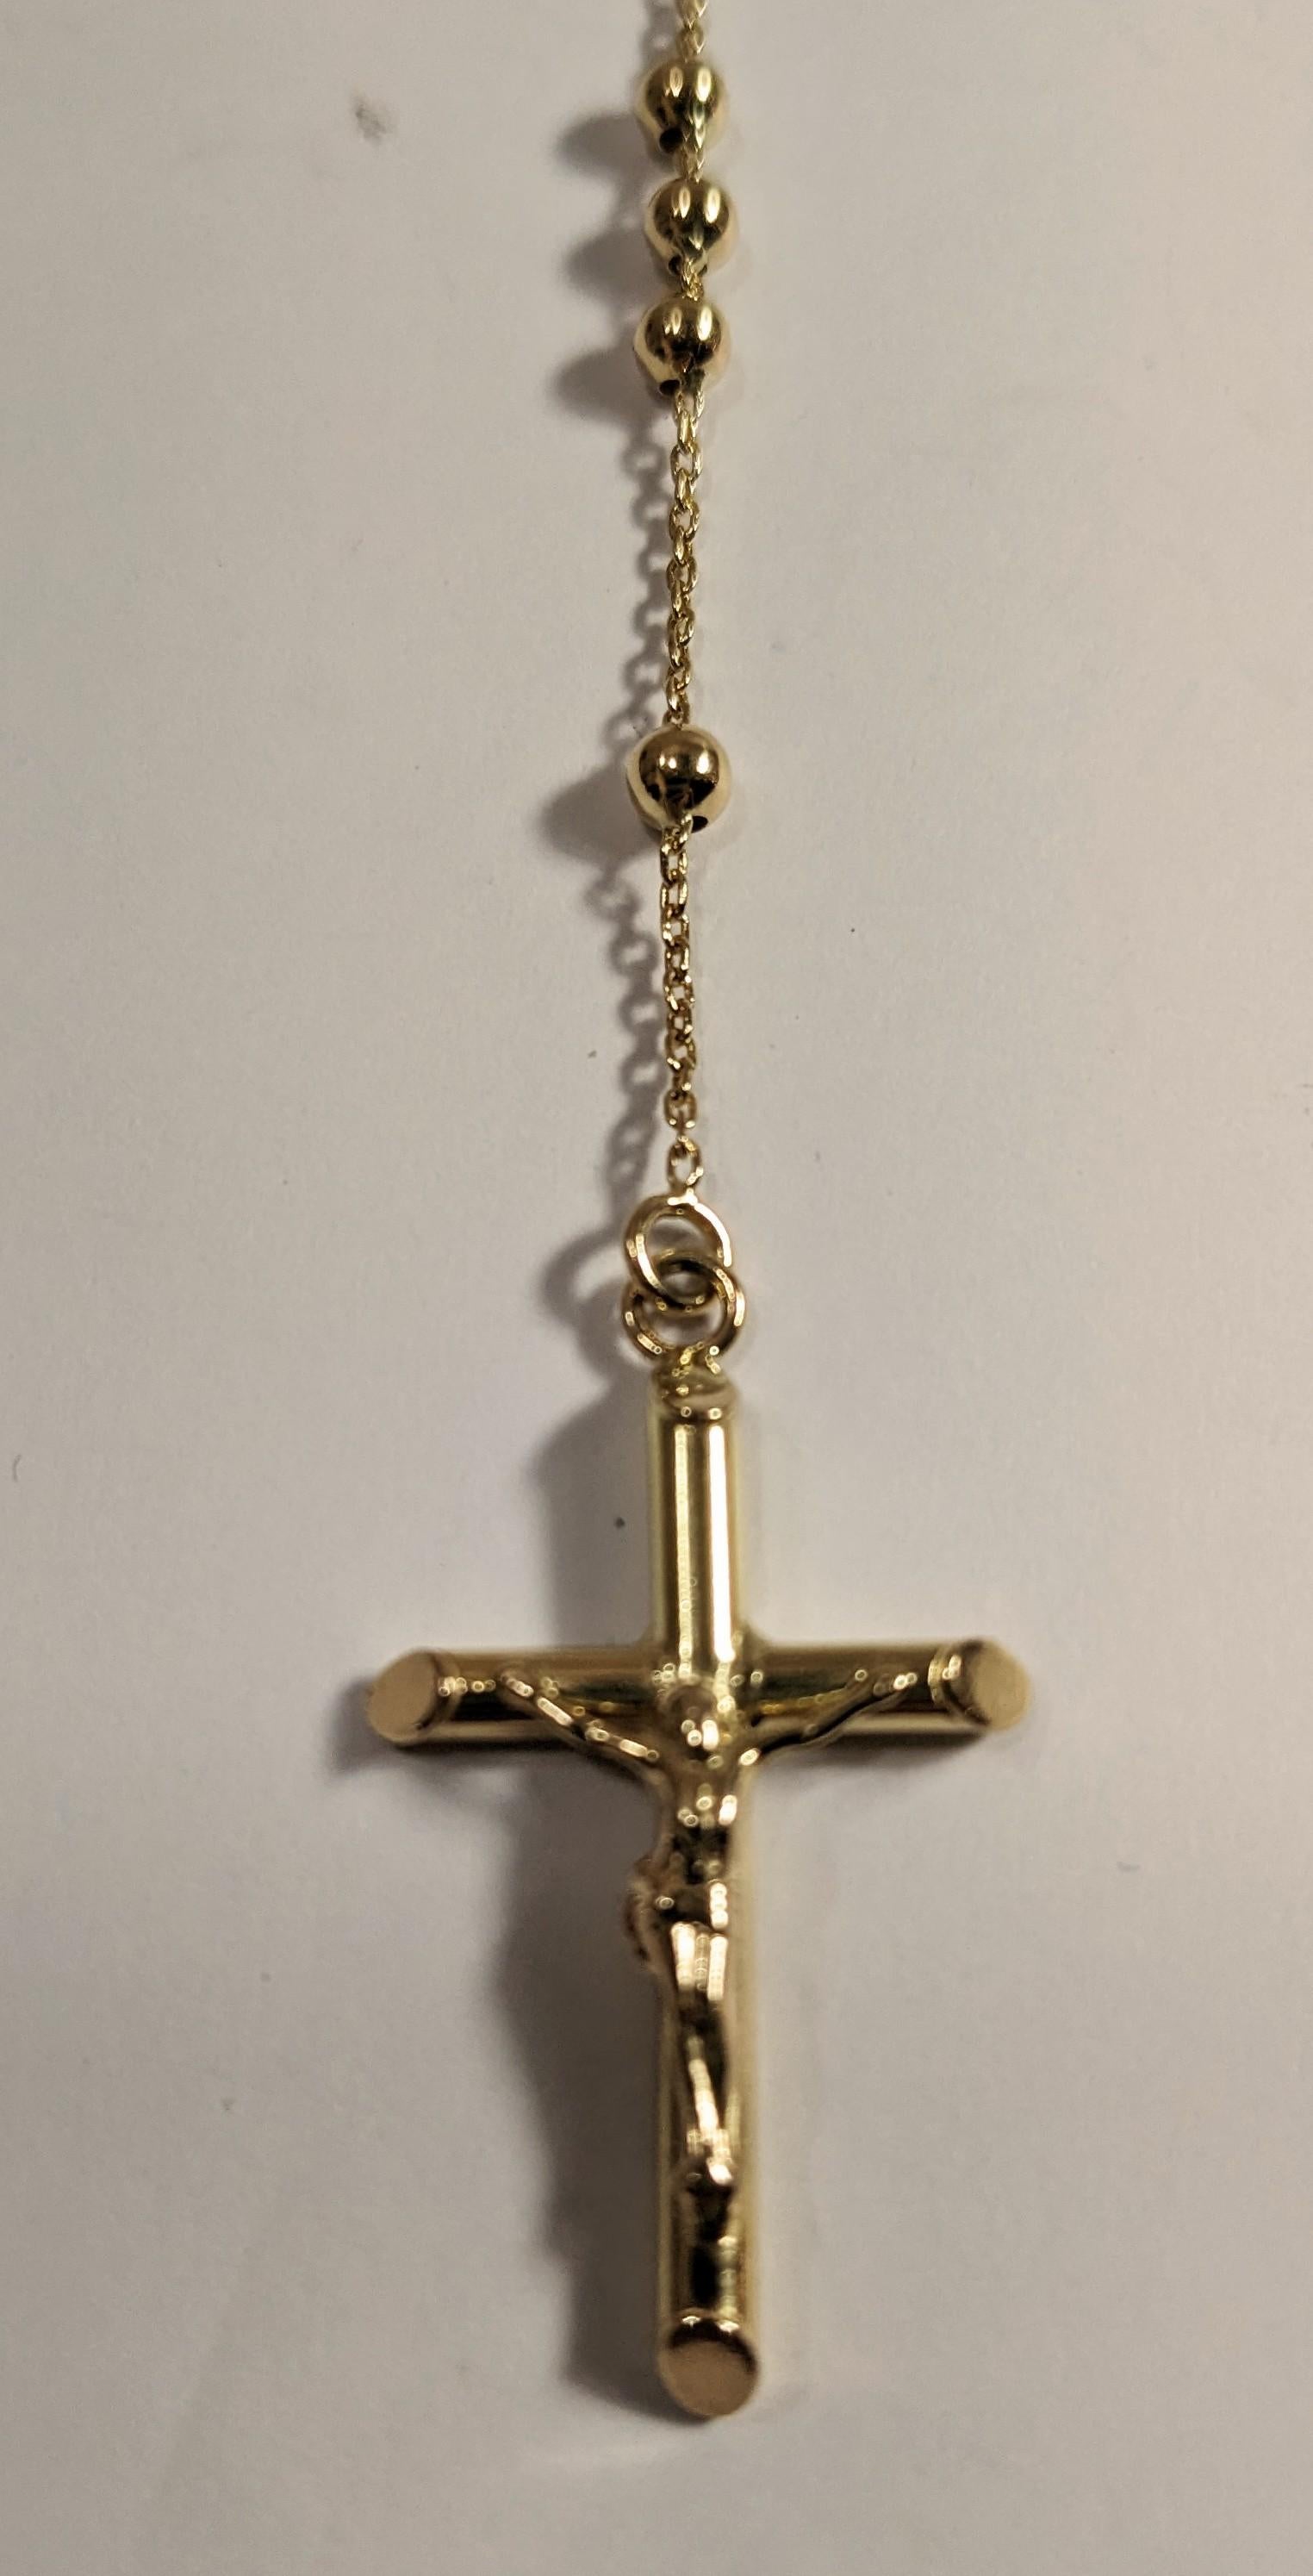 18k Gold Rosary with  Virgin and Cross with Christ.
4mm balls. Length to the medal: 40 cm. From the medal to the cross: 9 cm.
Weights is 7,8 grams.

 All PRADERA jewels are guaranteed and come from sustainable and reliable sources and owners. We are